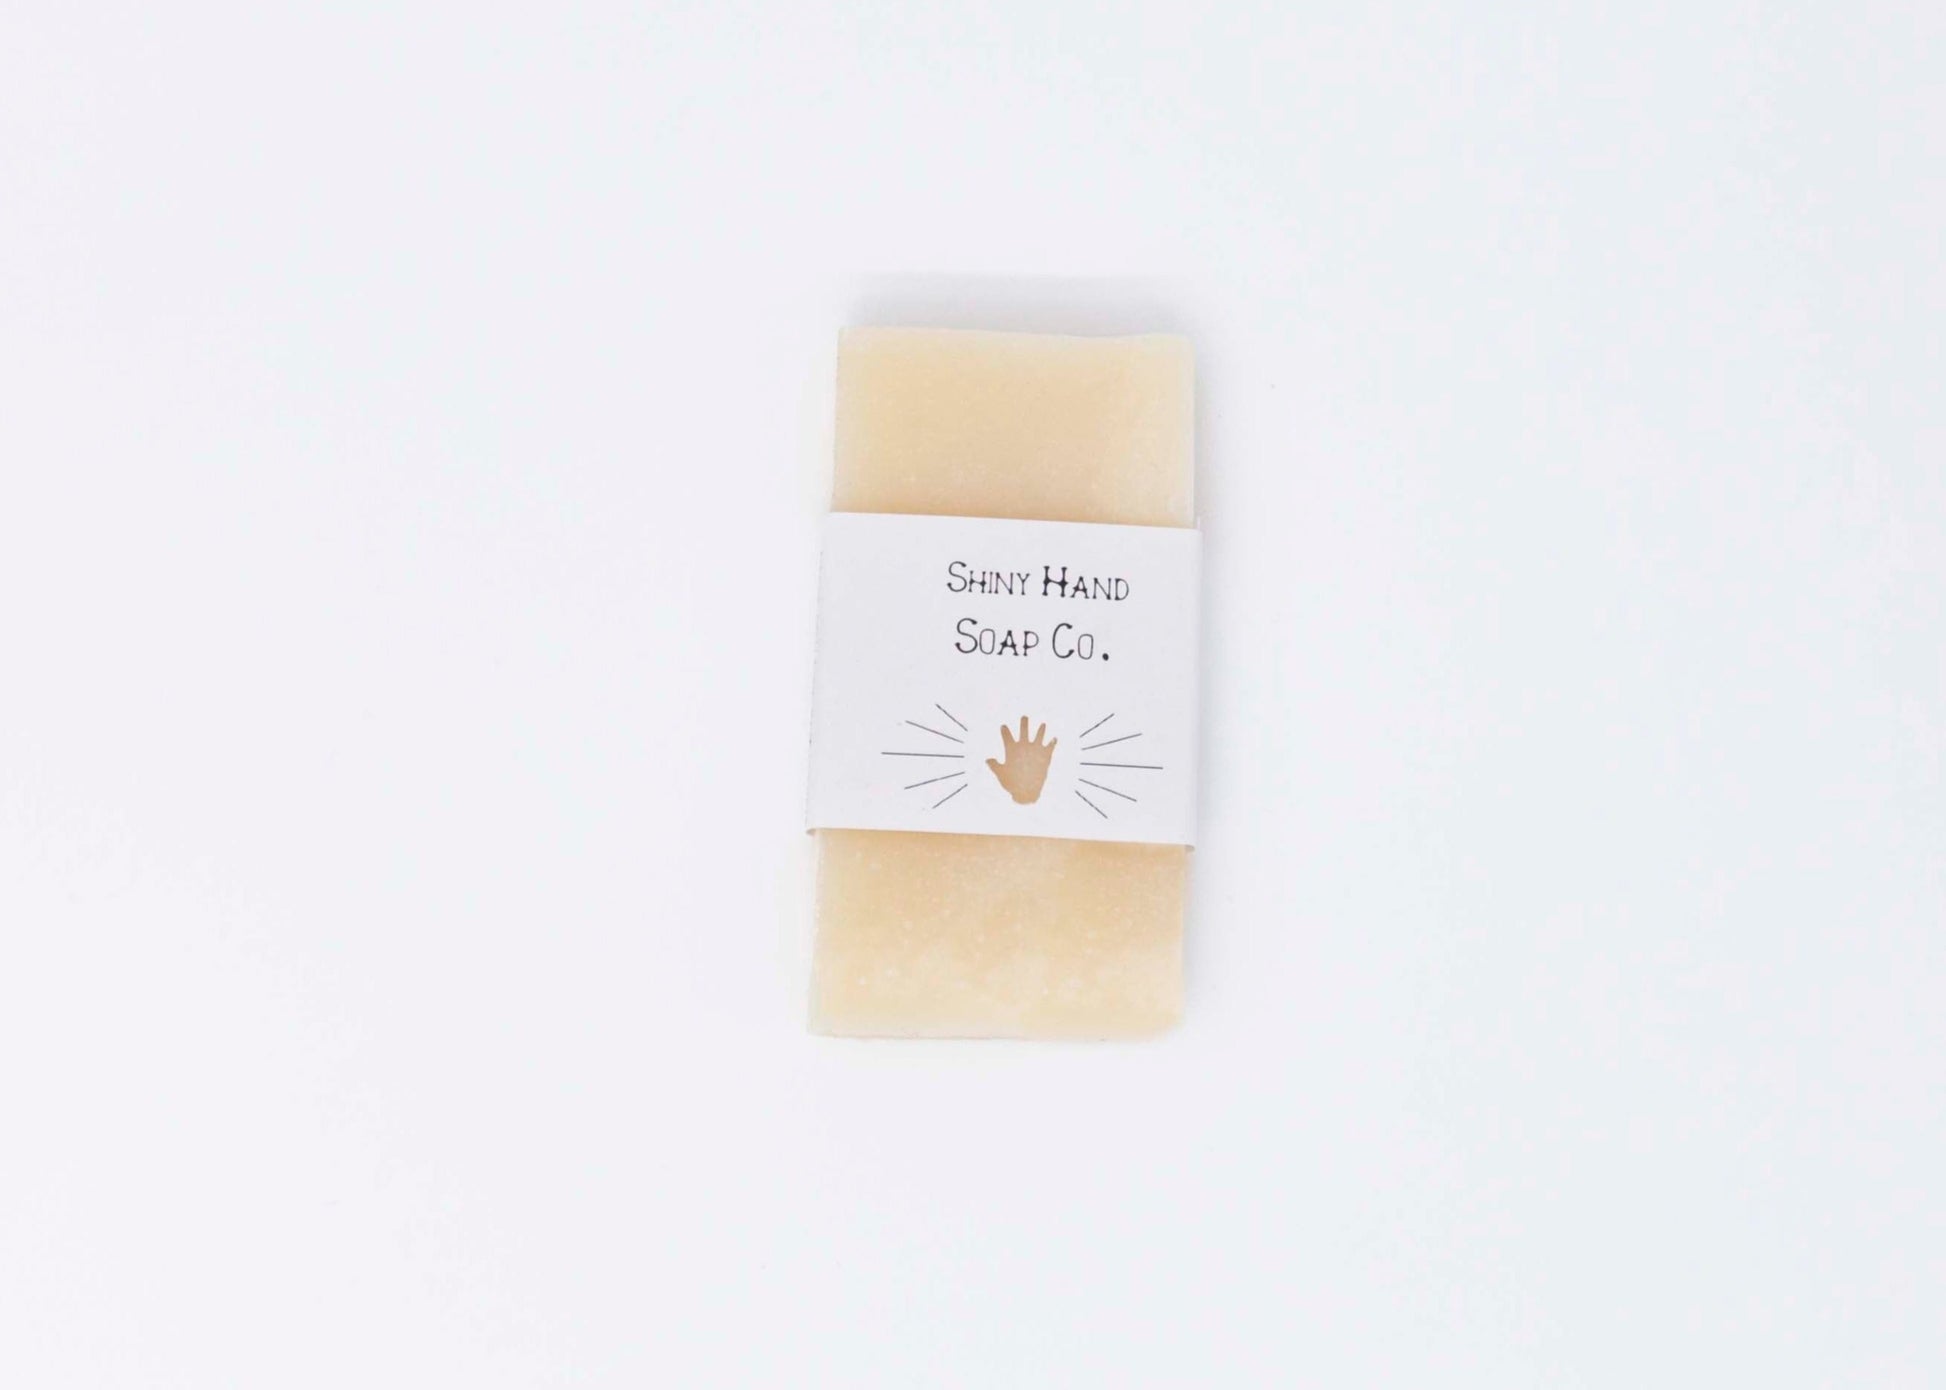 One creamy ivory white miniature bar of Avocado Butter bar soap sits on a clean white background with a white paper wrapper that has a hand shape cut out of it.